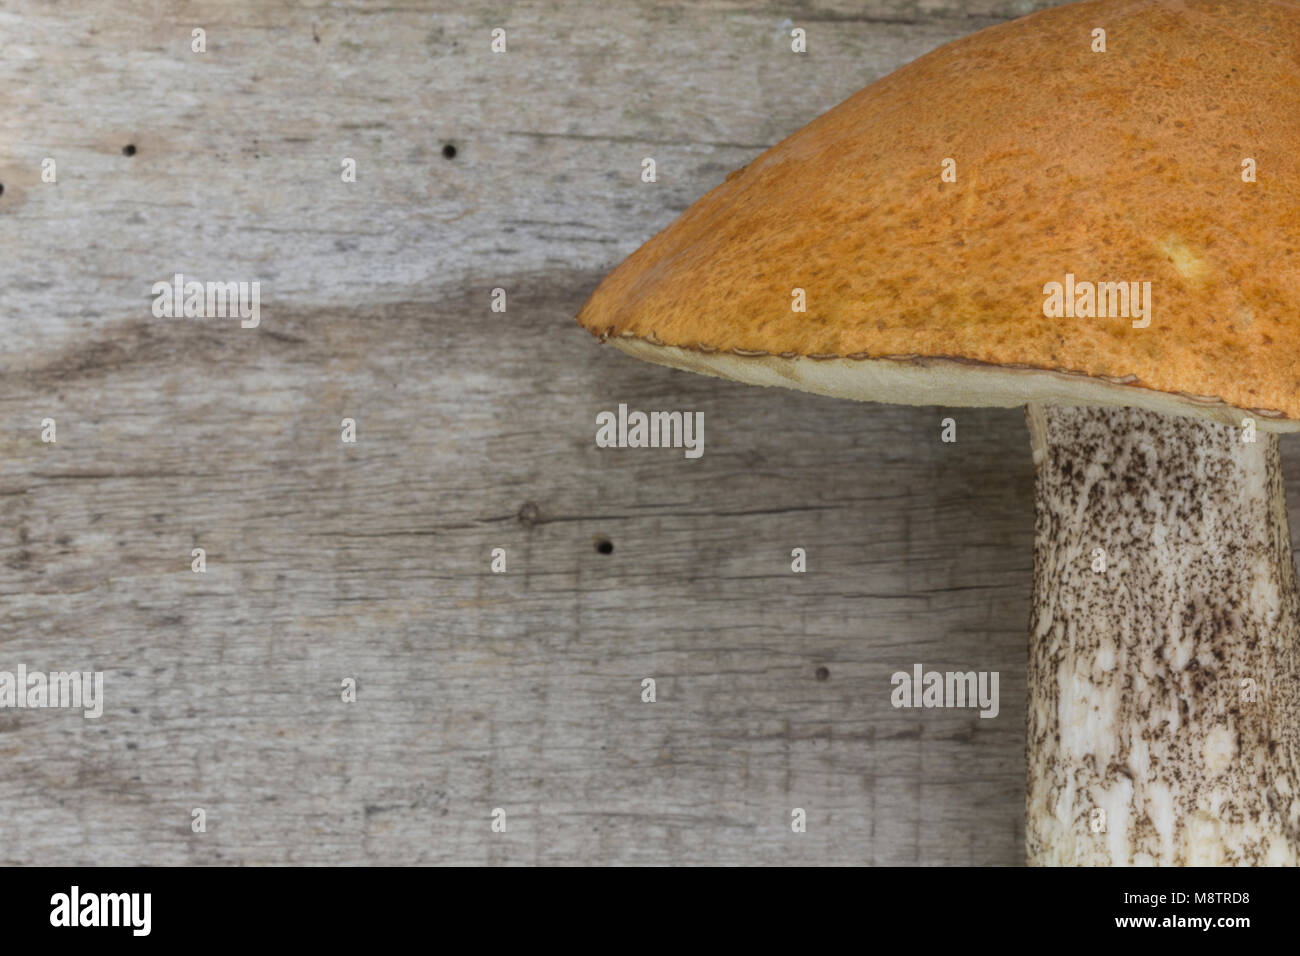 Mushrooms  Brown Birch Bolete (Leccinum scabrum; Boletus scaber) on the old wooden board. Brown boletus. Background. Top view. Stock Photo